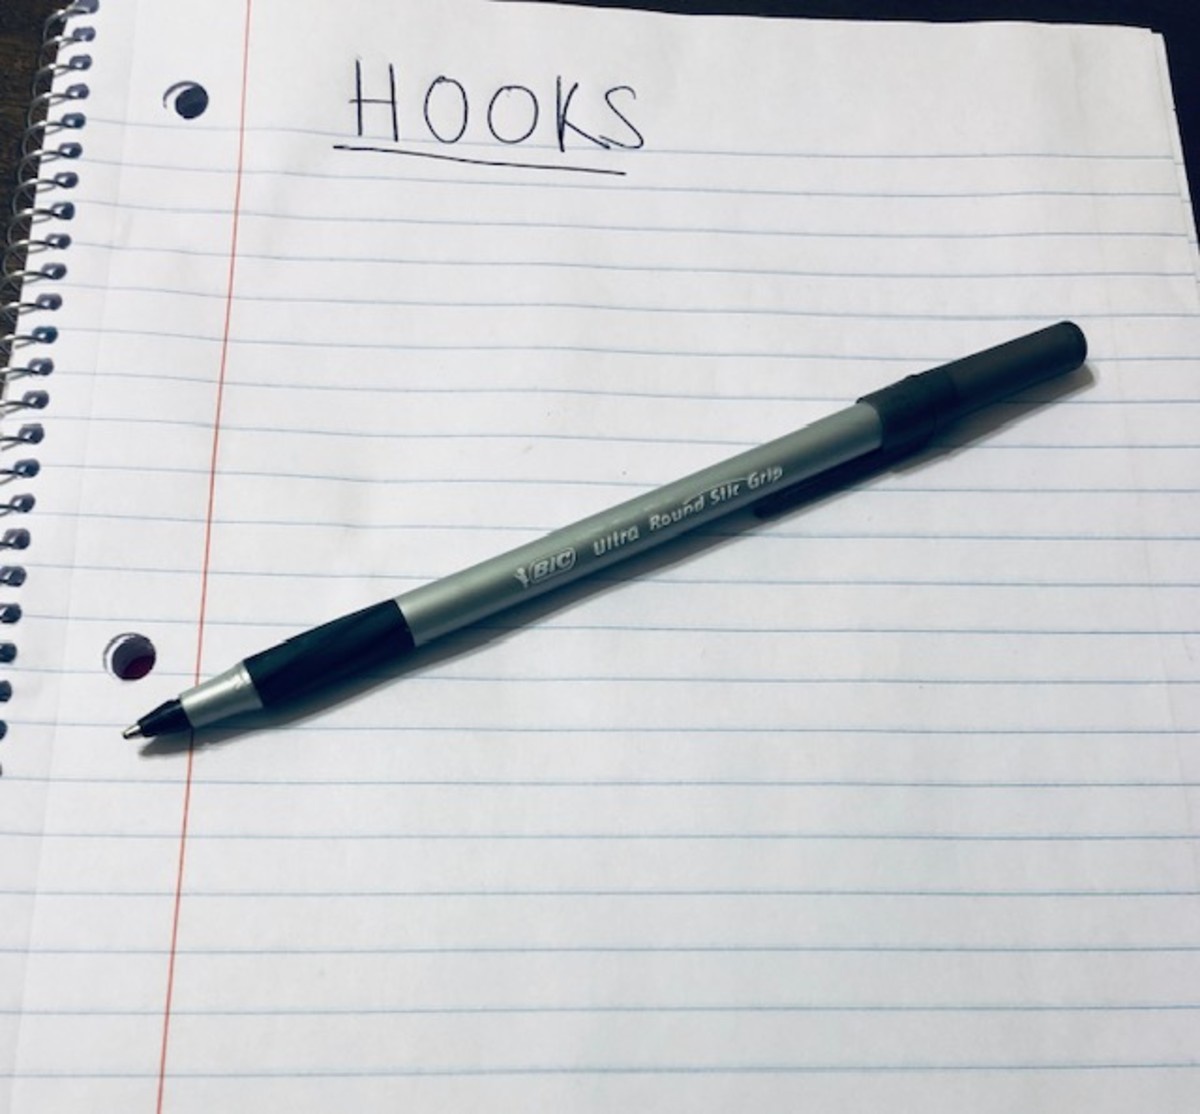 How to Write the Opening Hook of a Script